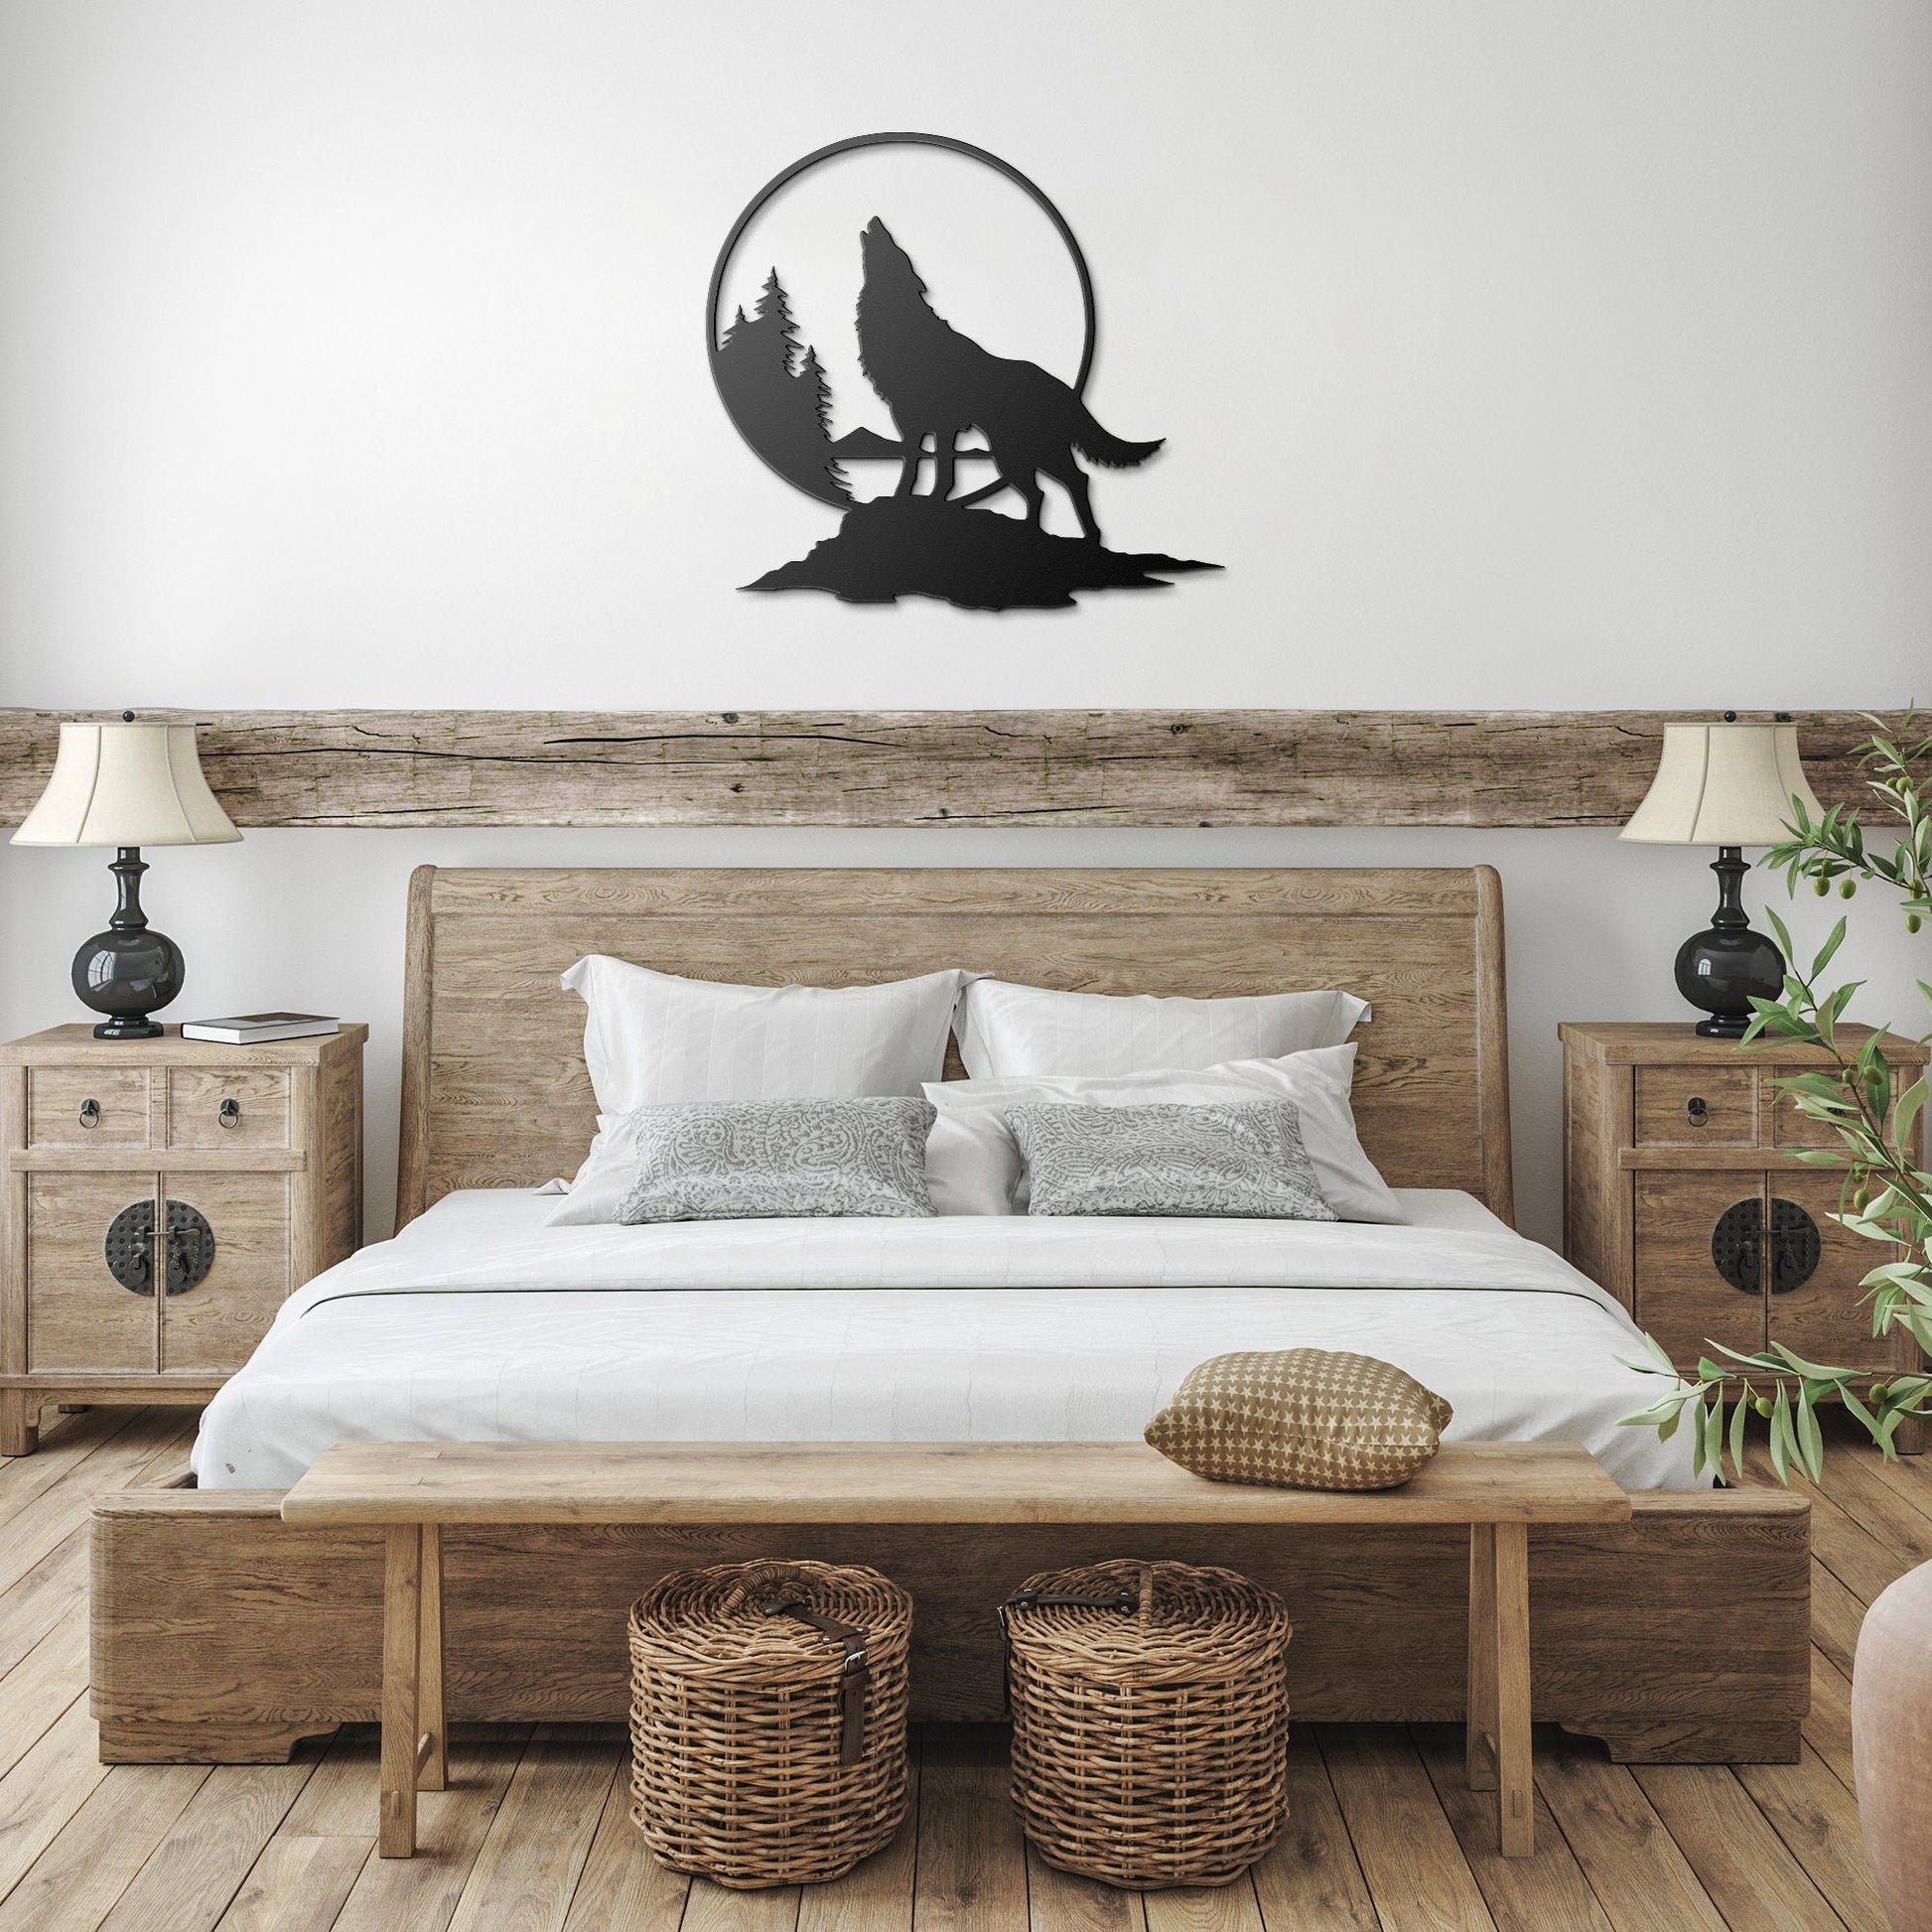 Howling Coyote Wildlife Metal Wall Decor Sign Cutout Lodge Cabin Artwork Outdoor Enthusiast Gift Idea for Rustic Design Hunting Sign Gift